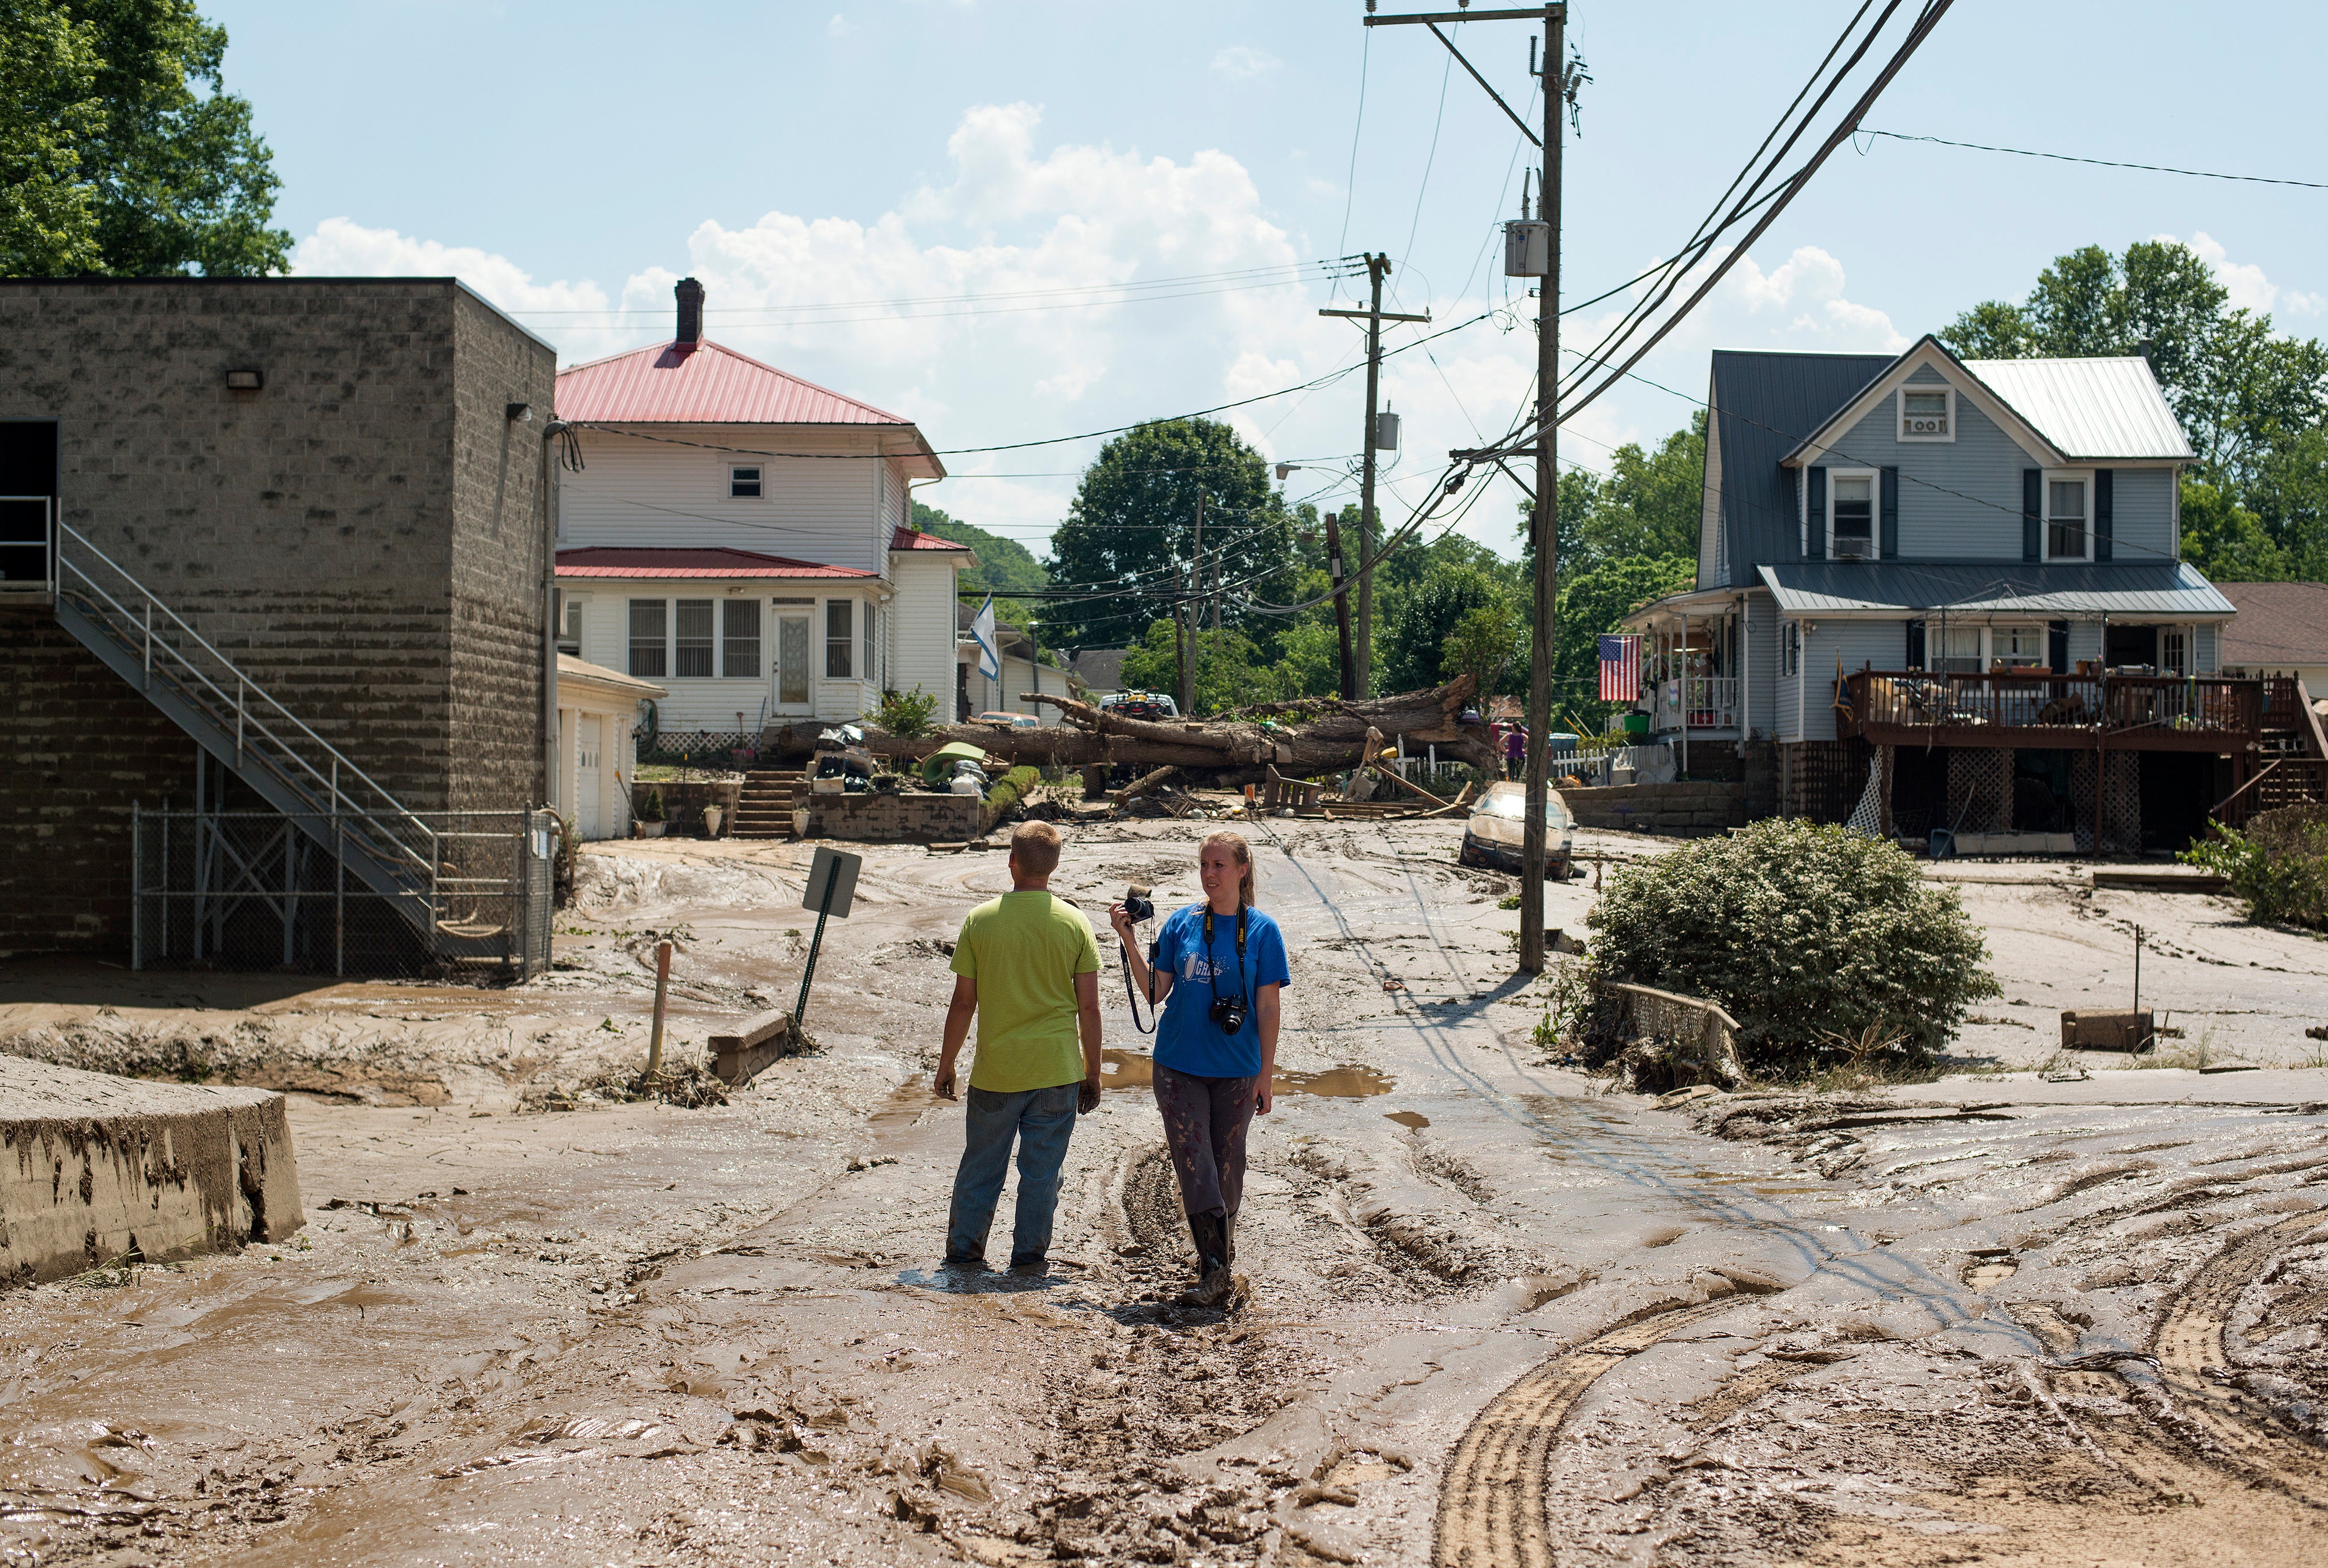 People on a mud-covered street after flooding in June 2016 in Clendenin, West Virginia. Floods claimed the lives of at least 23 people in West Virginia